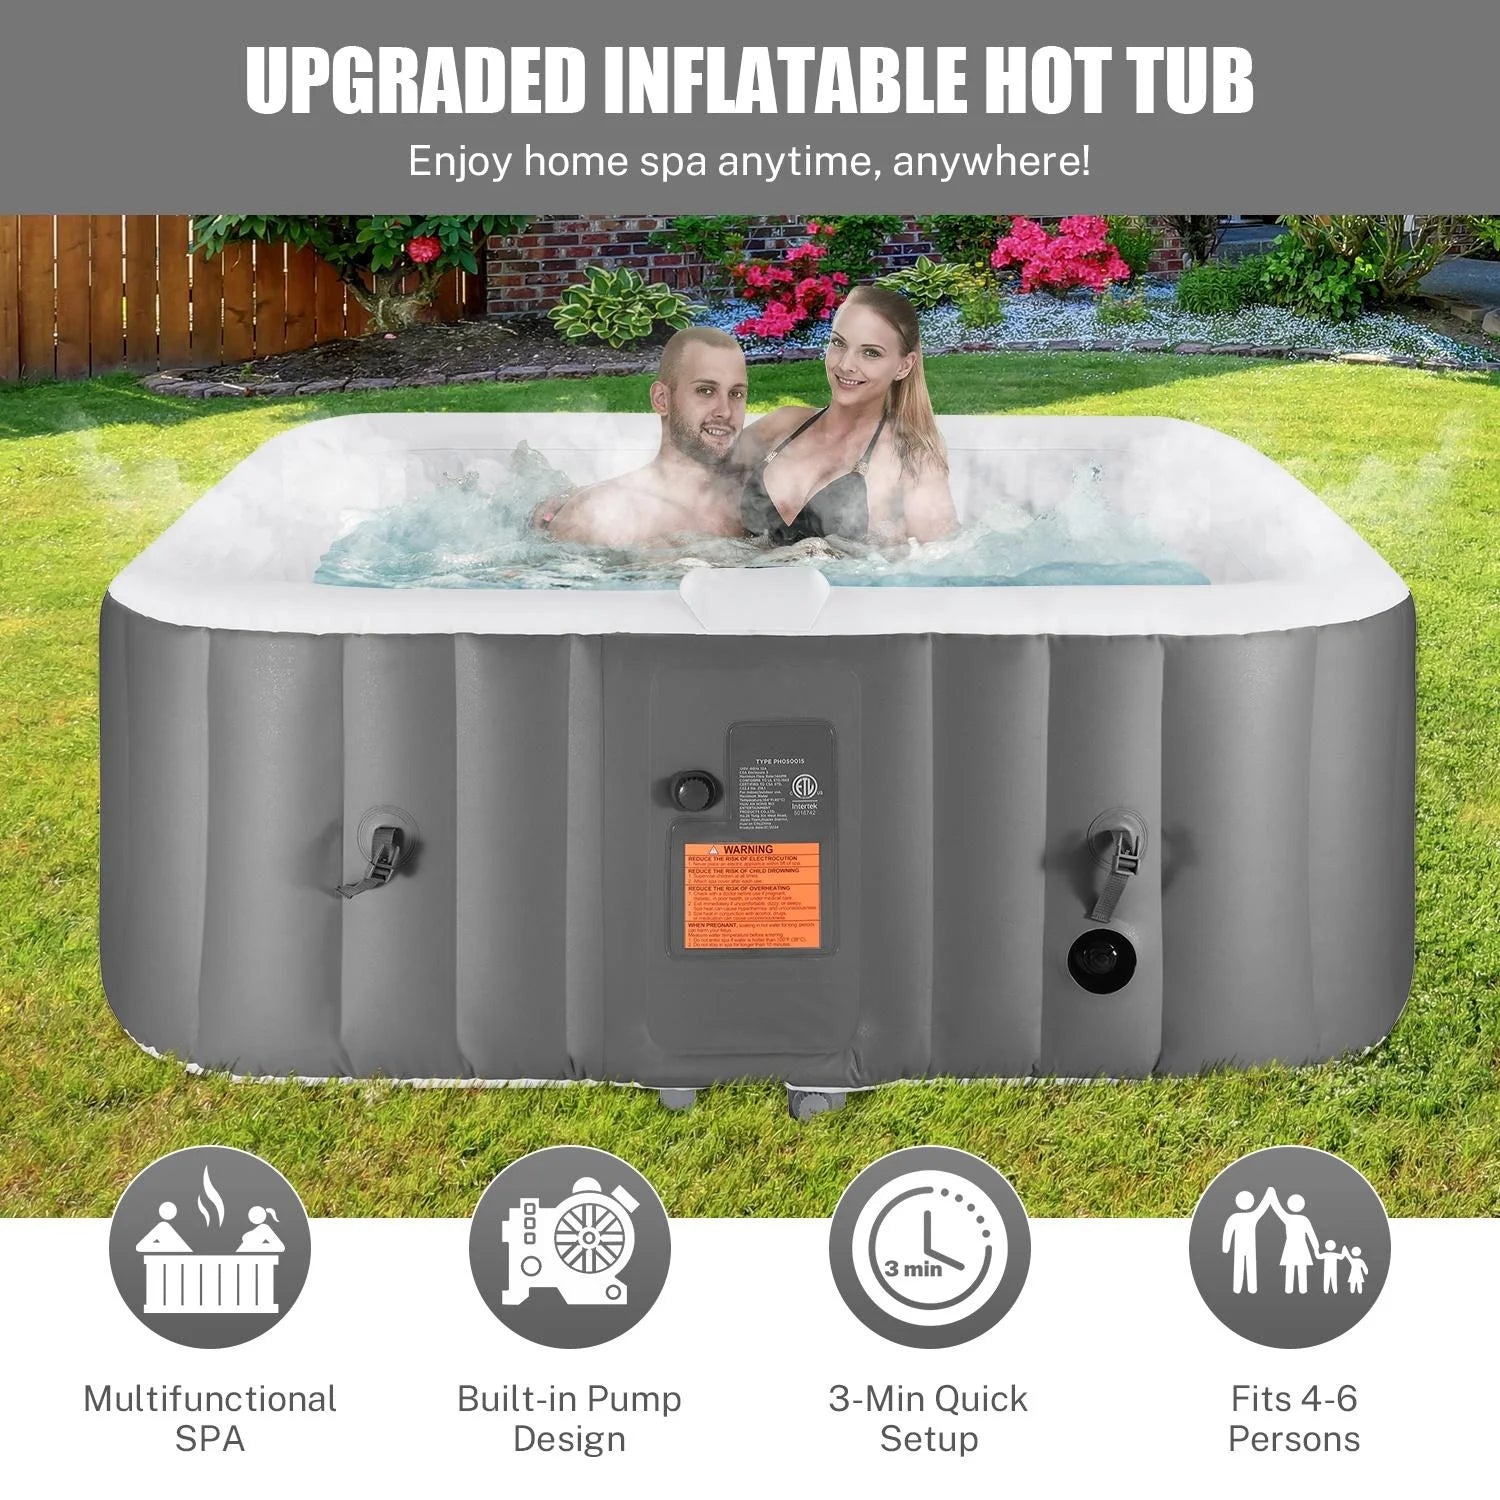 Upgraded Inflatable Hot Tub,  6 Person Hot Tub with Hidden Pump, Portable Spa Tub Outdoor Indoor Use W/130Pcs Jet, Lockable Cover, Storage Bag, Cover, 240Gal